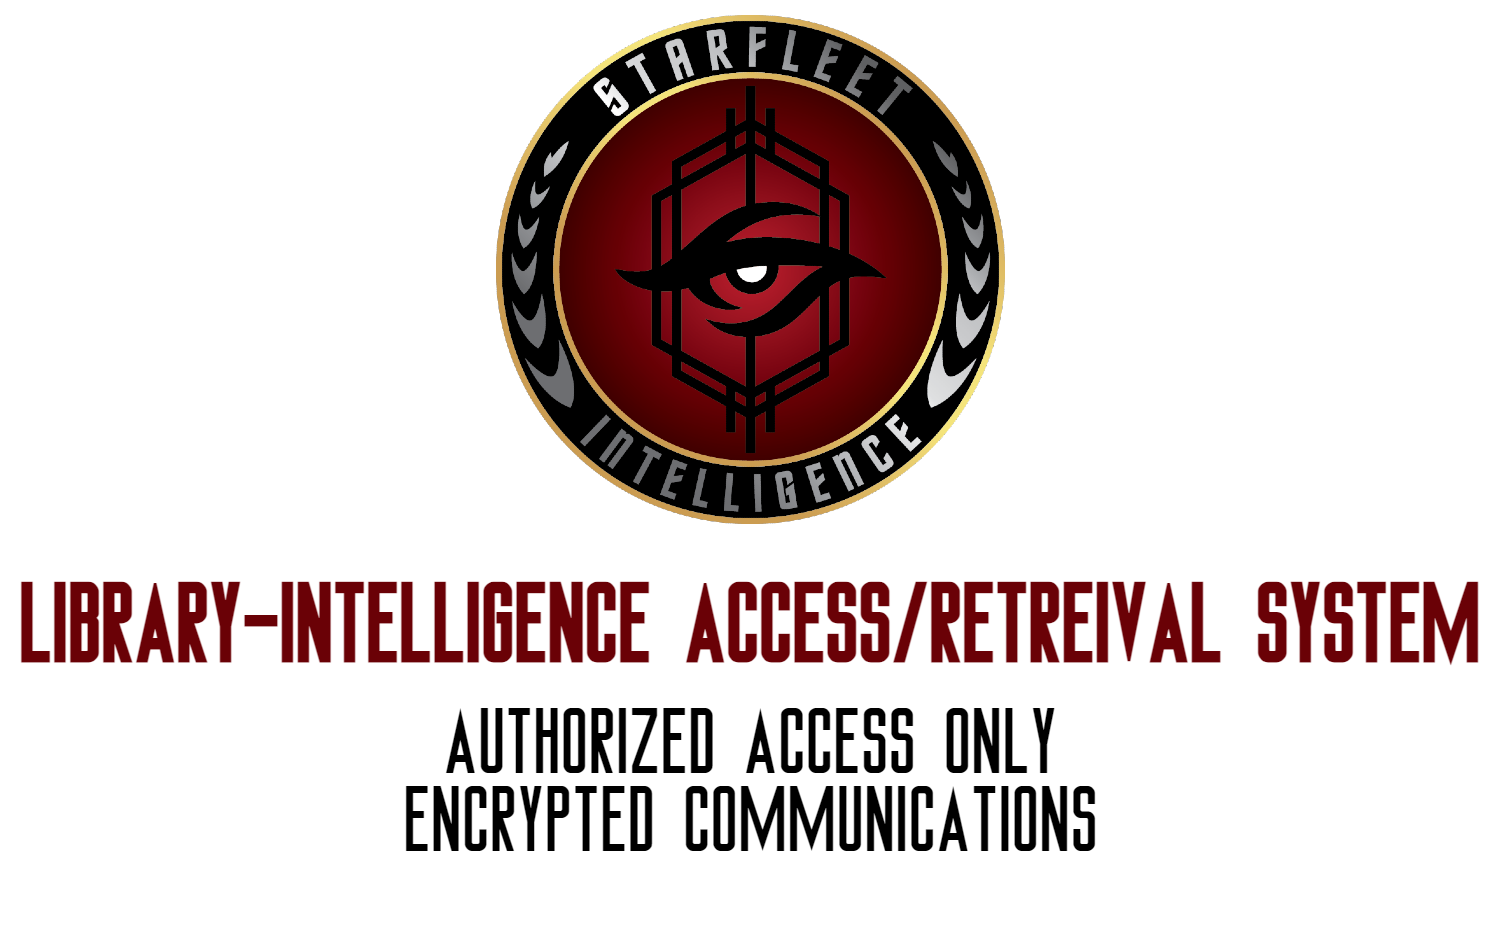 LIBRARY-INTELLIGENCE ACCESS/RETREIVAL system Authorized access only encrypted communications